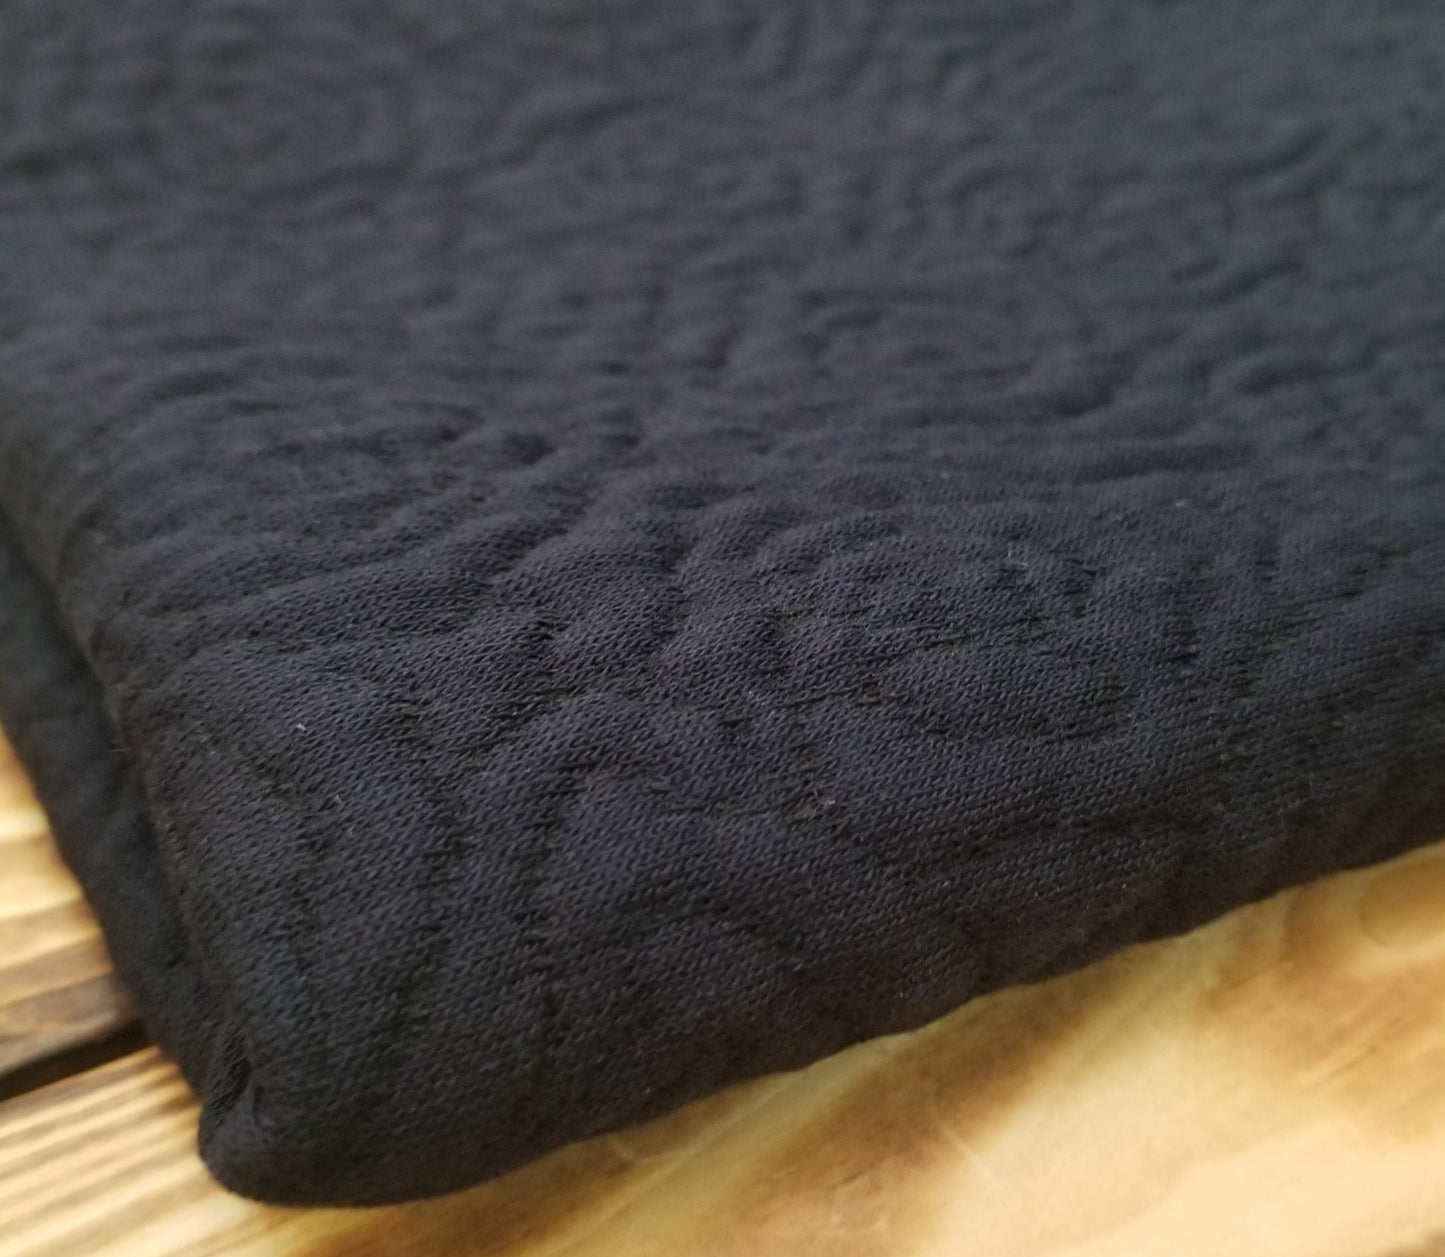 Designer Deadstock Rose Embroidered Dark Navy and Black Quilted Wool Blend Knit-Priced by the yard